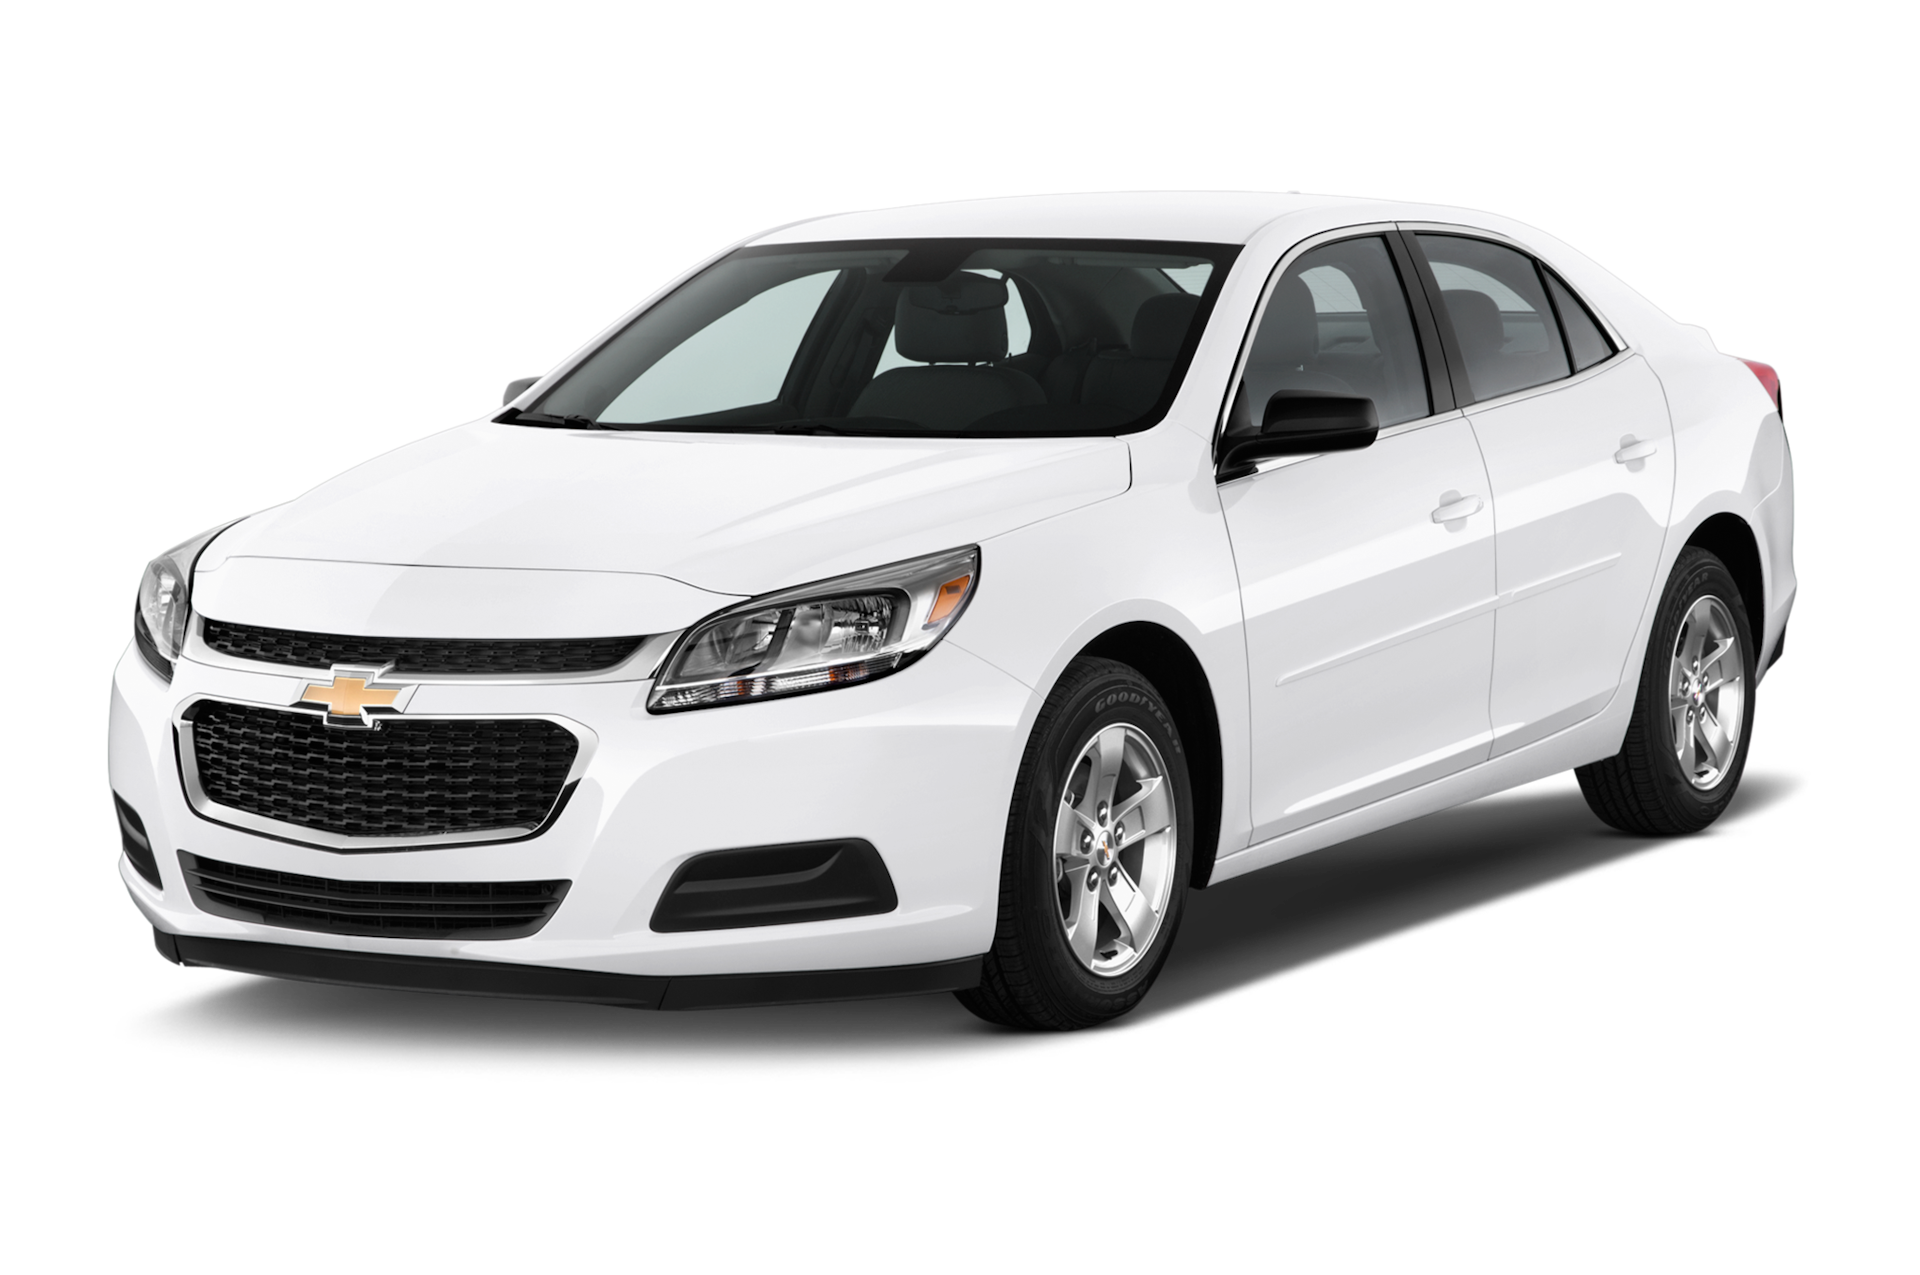 2014 Chevrolet Malibu Prices, Reviews, and Photos - MotorTrend